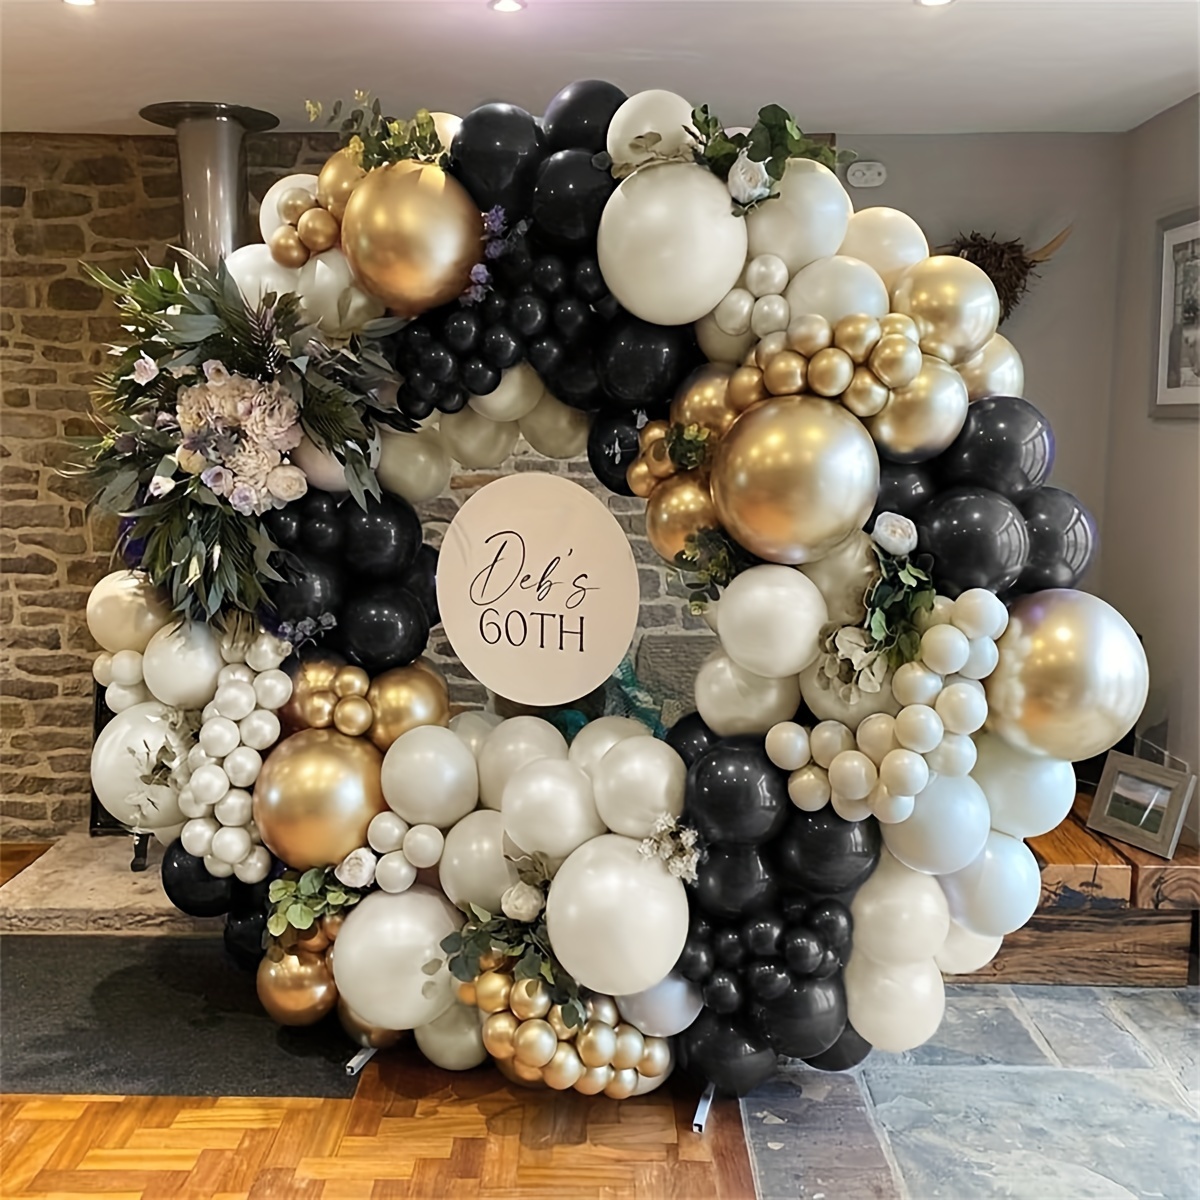 

122pcs Black Pearl White Balloon Garland Metal Champagne Golden Unisex Balloon Arch Kit For Mother's Day Valentine's Day Birthday Graduation Wedding Bachelorette Party Decoration